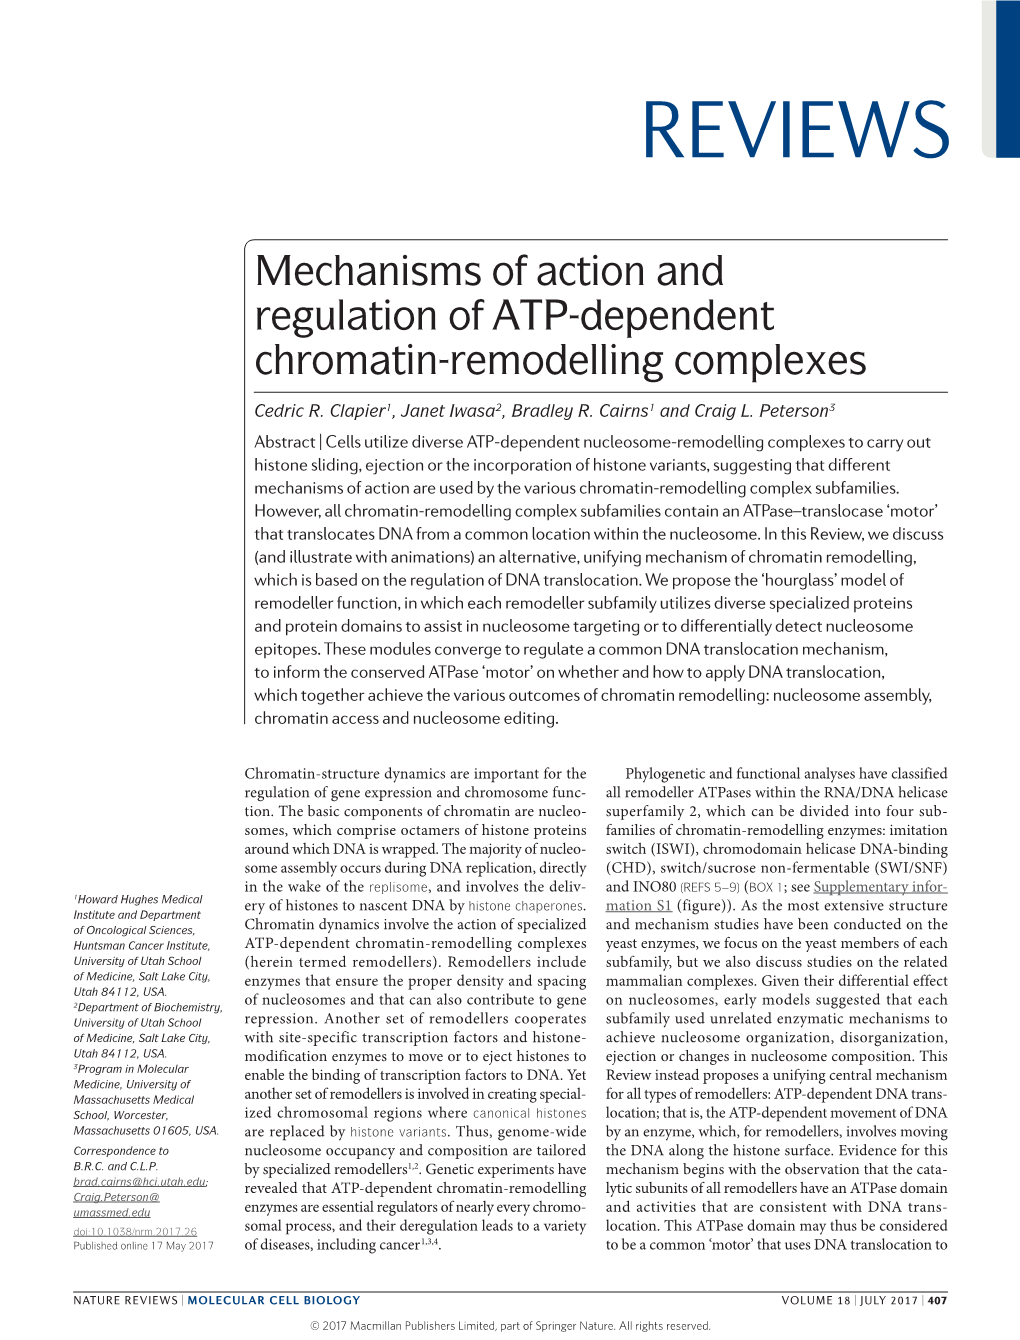 Mechanisms of Action and Regulation of ATP-Dependent Chromatin-Remodelling Complexes